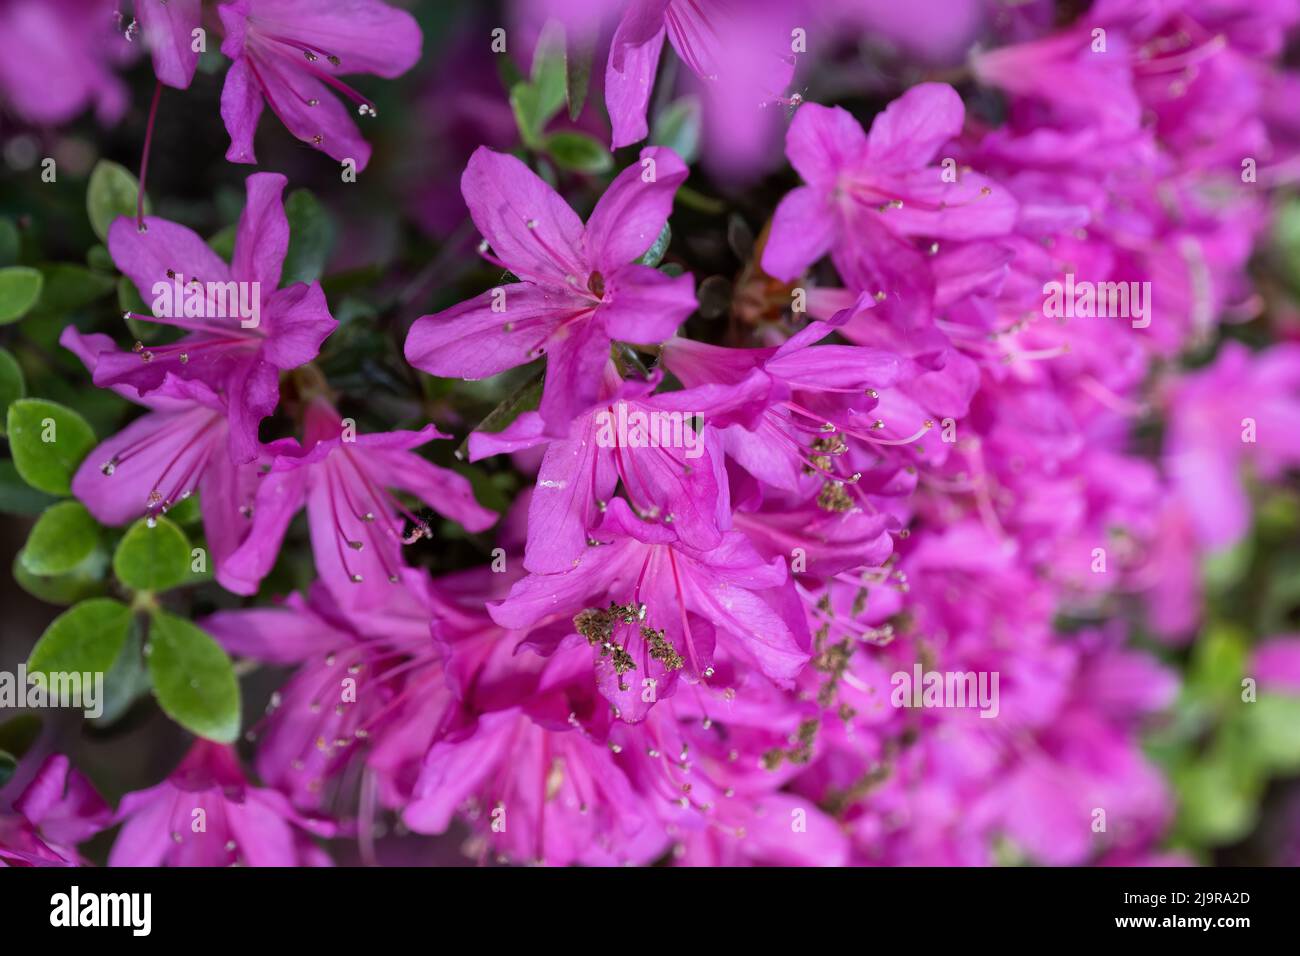 Rhododendron Nova Zembla blooming flowers, evergreen shrub in the family Ericaceae. Stock Photo